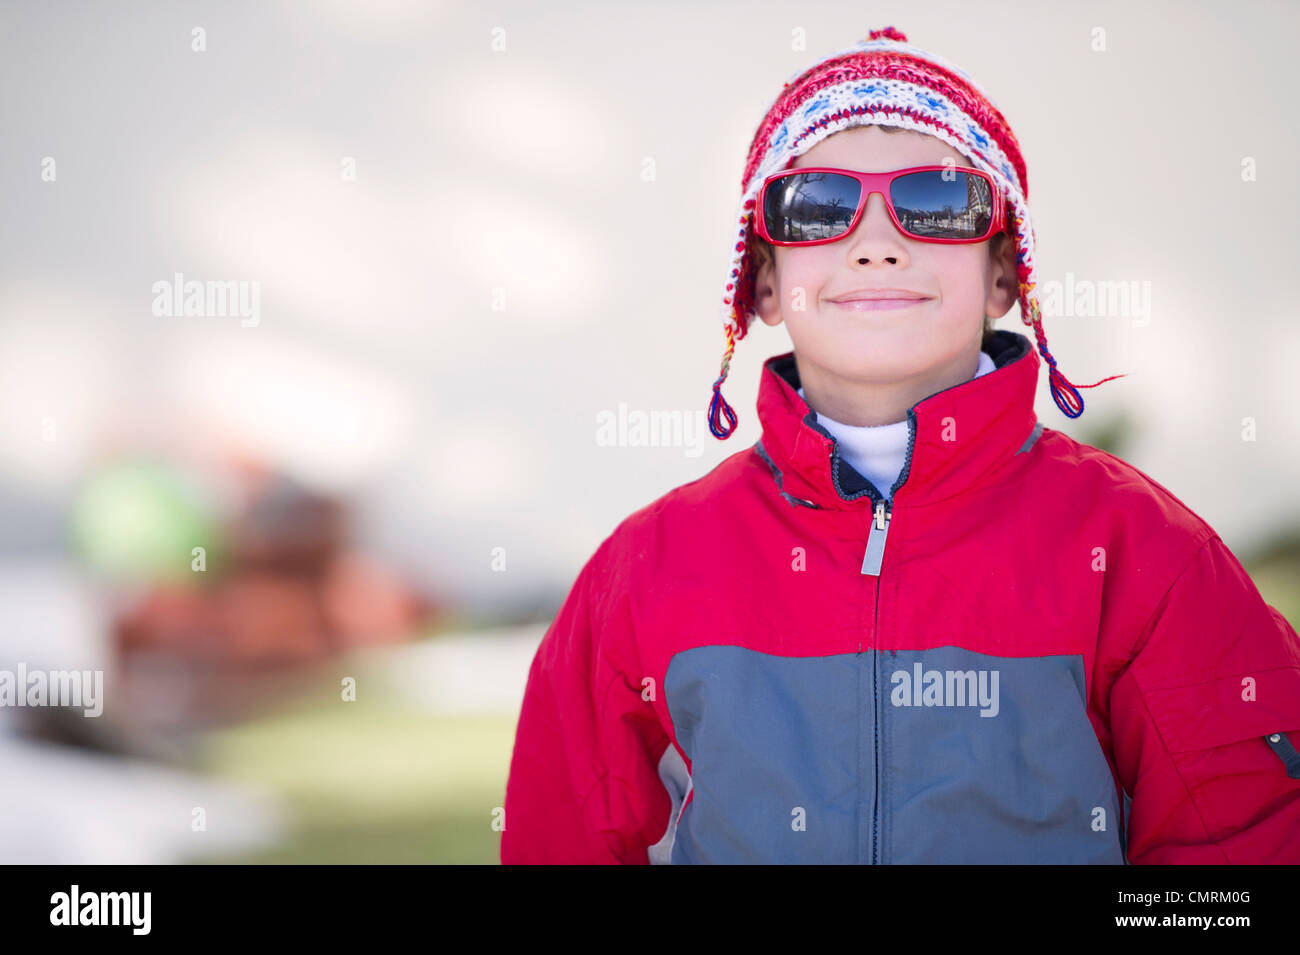 Hispanic boy in cold weather clothing Stock Photo